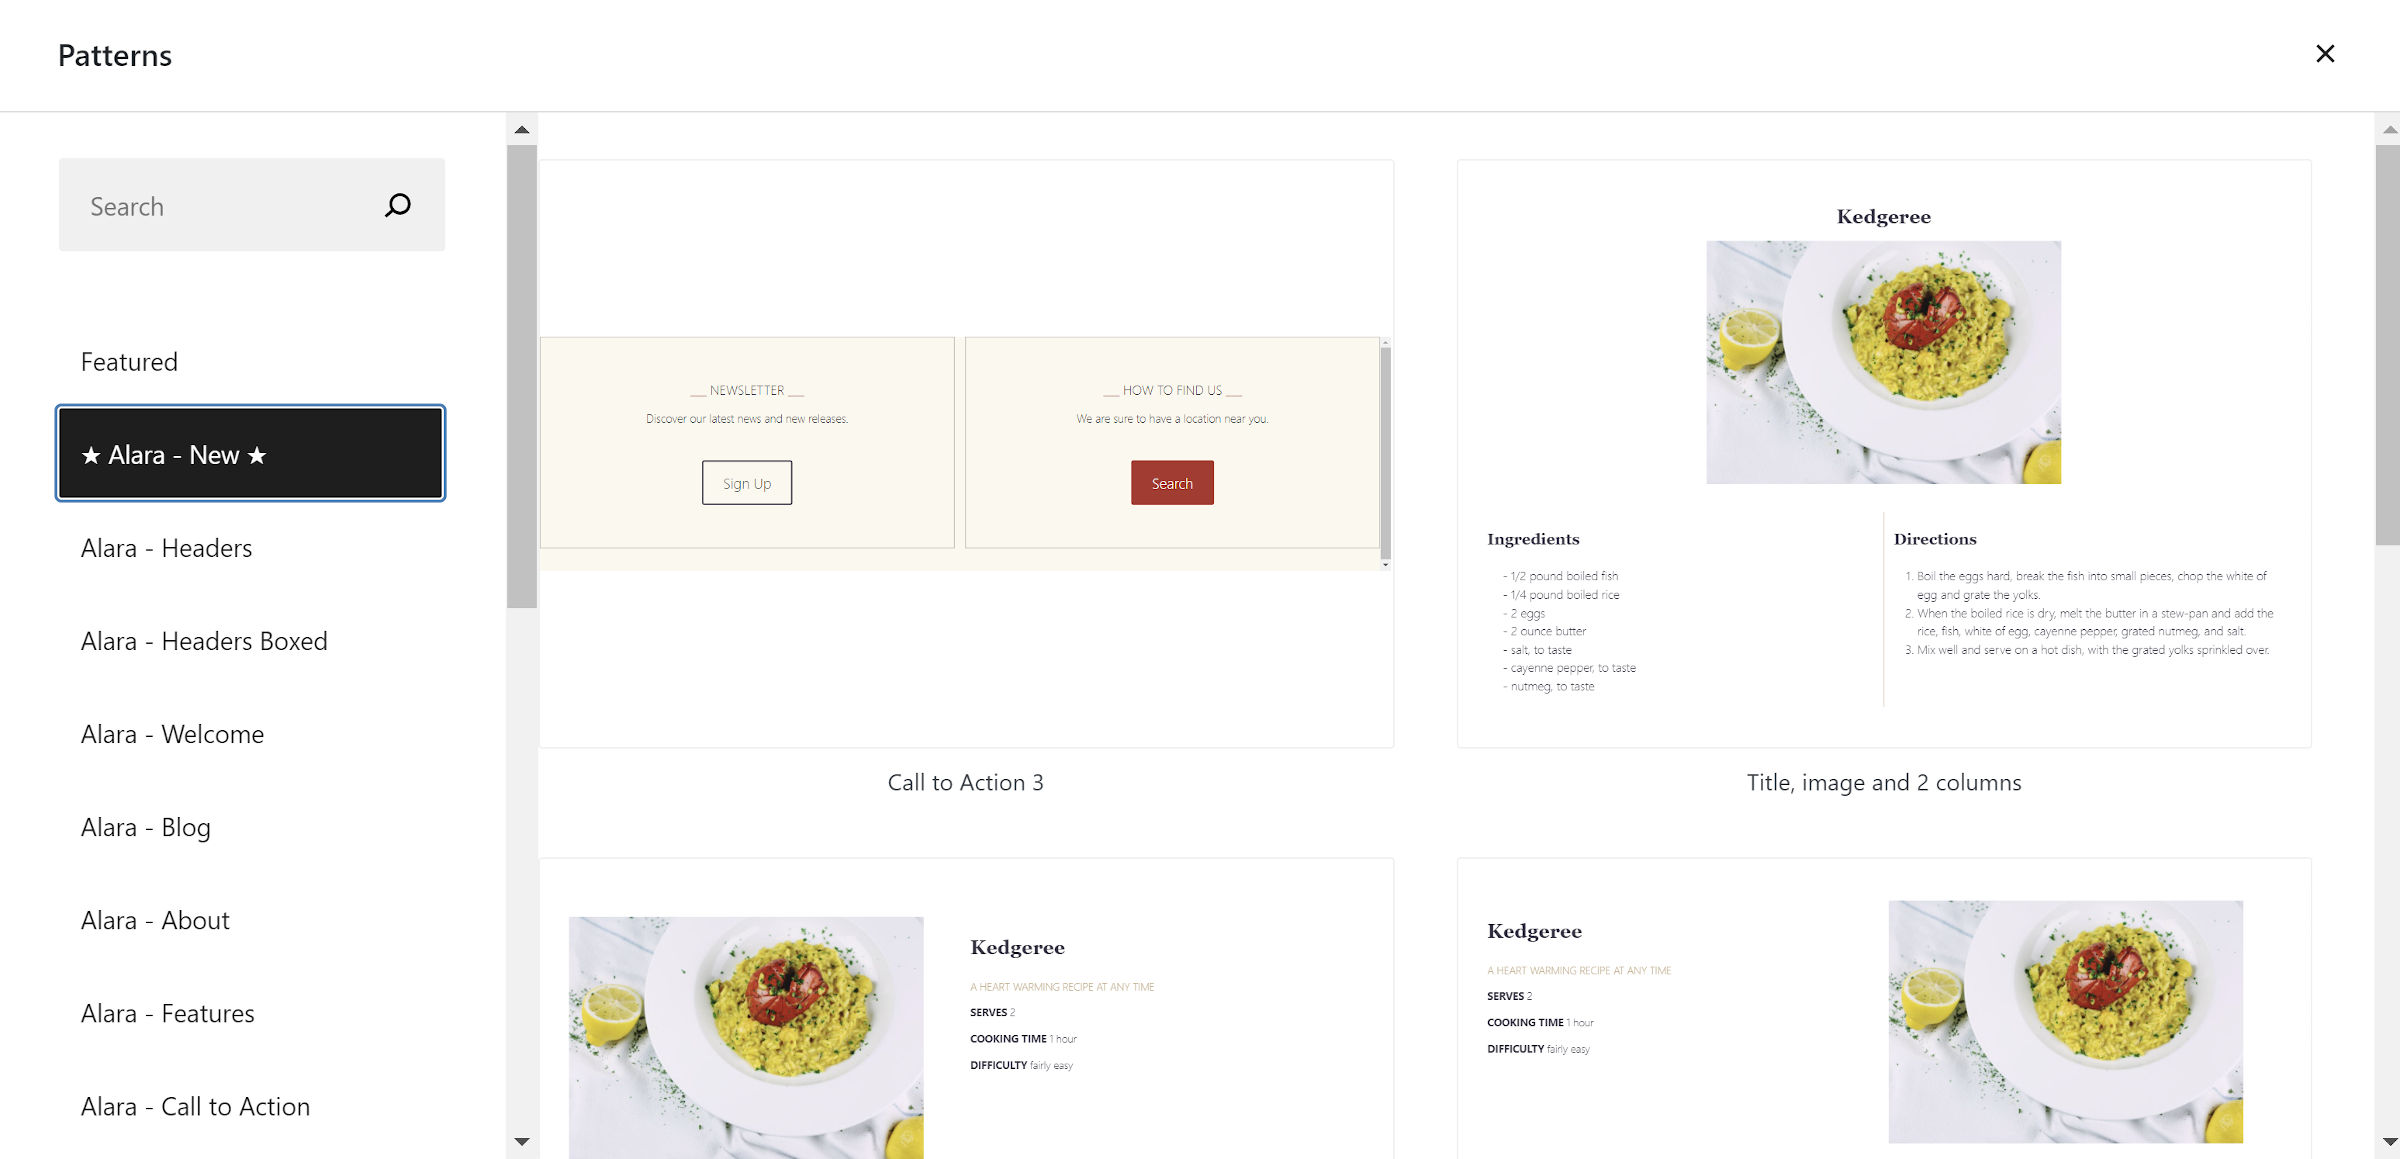 WordPress patterns explorer with the Alara theme's newest patterns category shown in two columns.